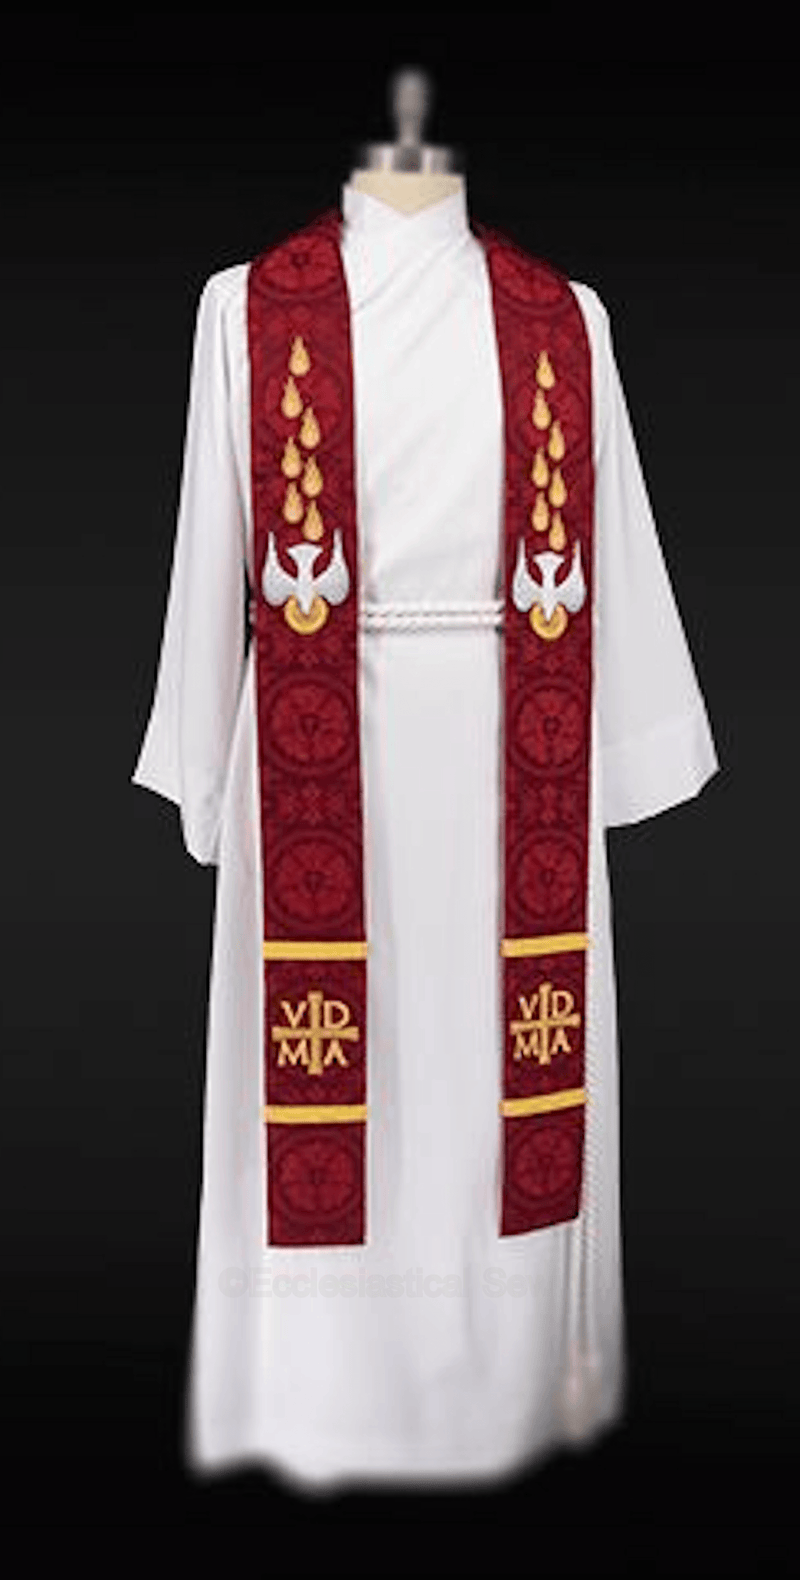 files/dove-pentecost-pastor-stole-or-red-pentecost-pastor-priest-stole-ecclesiastical-sewing-3-31790317961472.png